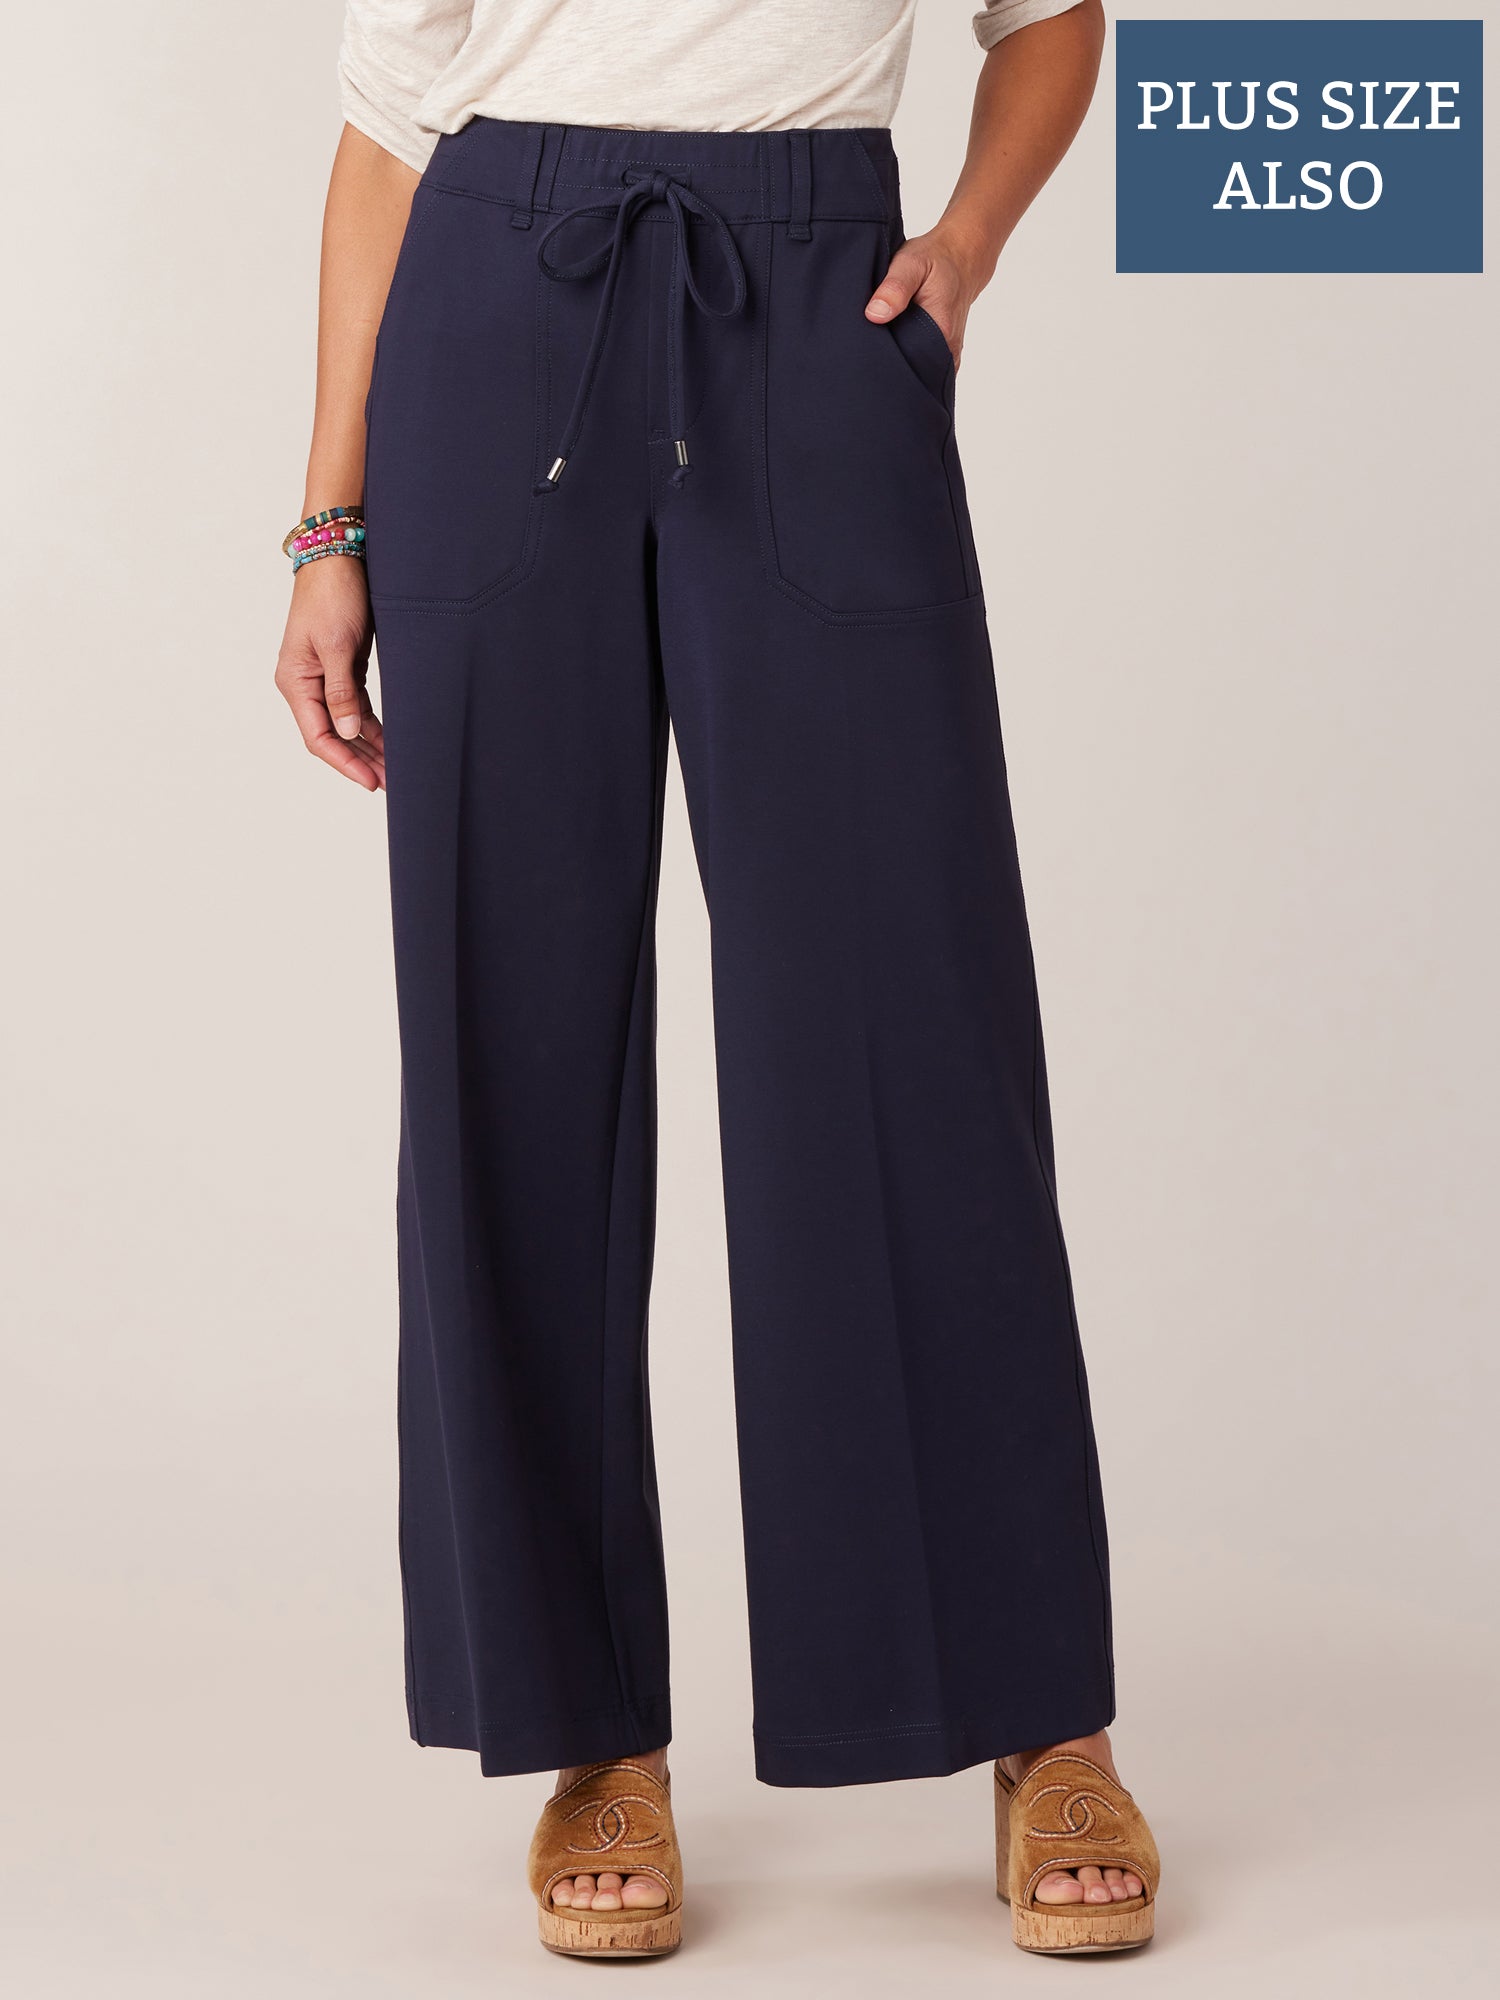 Relaxed Wide-Leg Primeblue Pants (Plus Size)